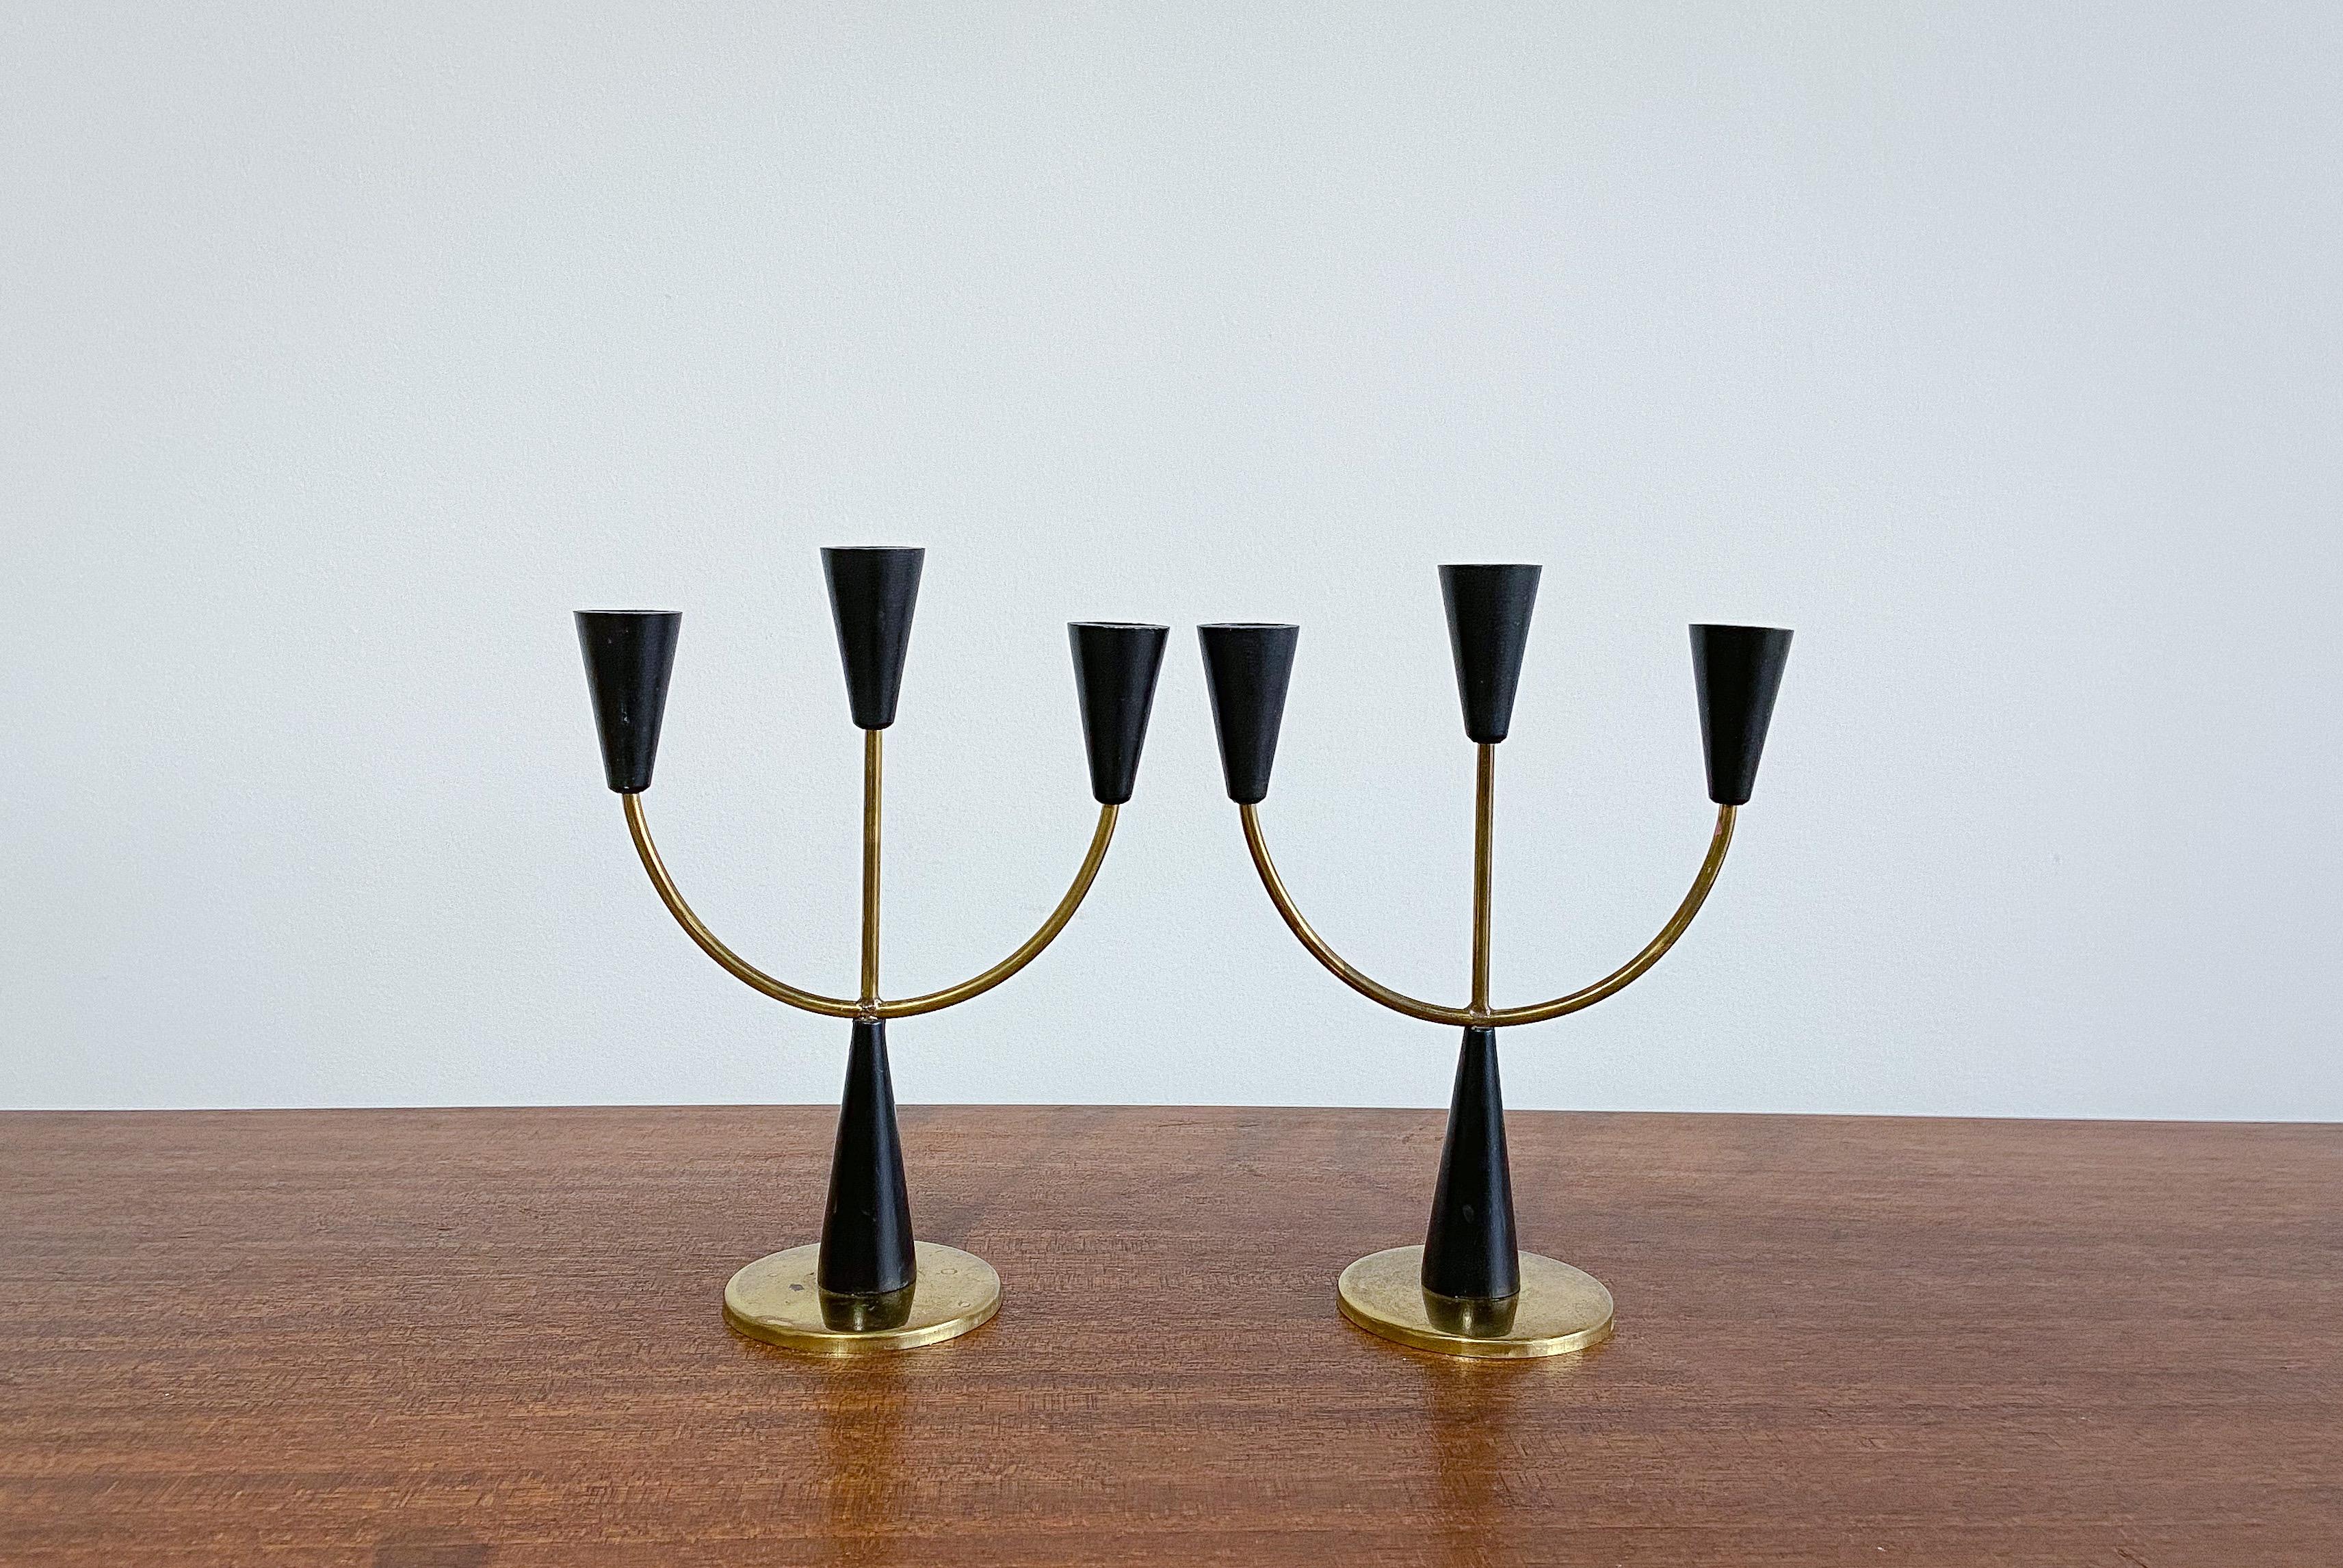 A vintage pair of Swedish candelabras made from brass and wood. 

Stamped Sweden on the underside.

Measures: Total height is 8.5